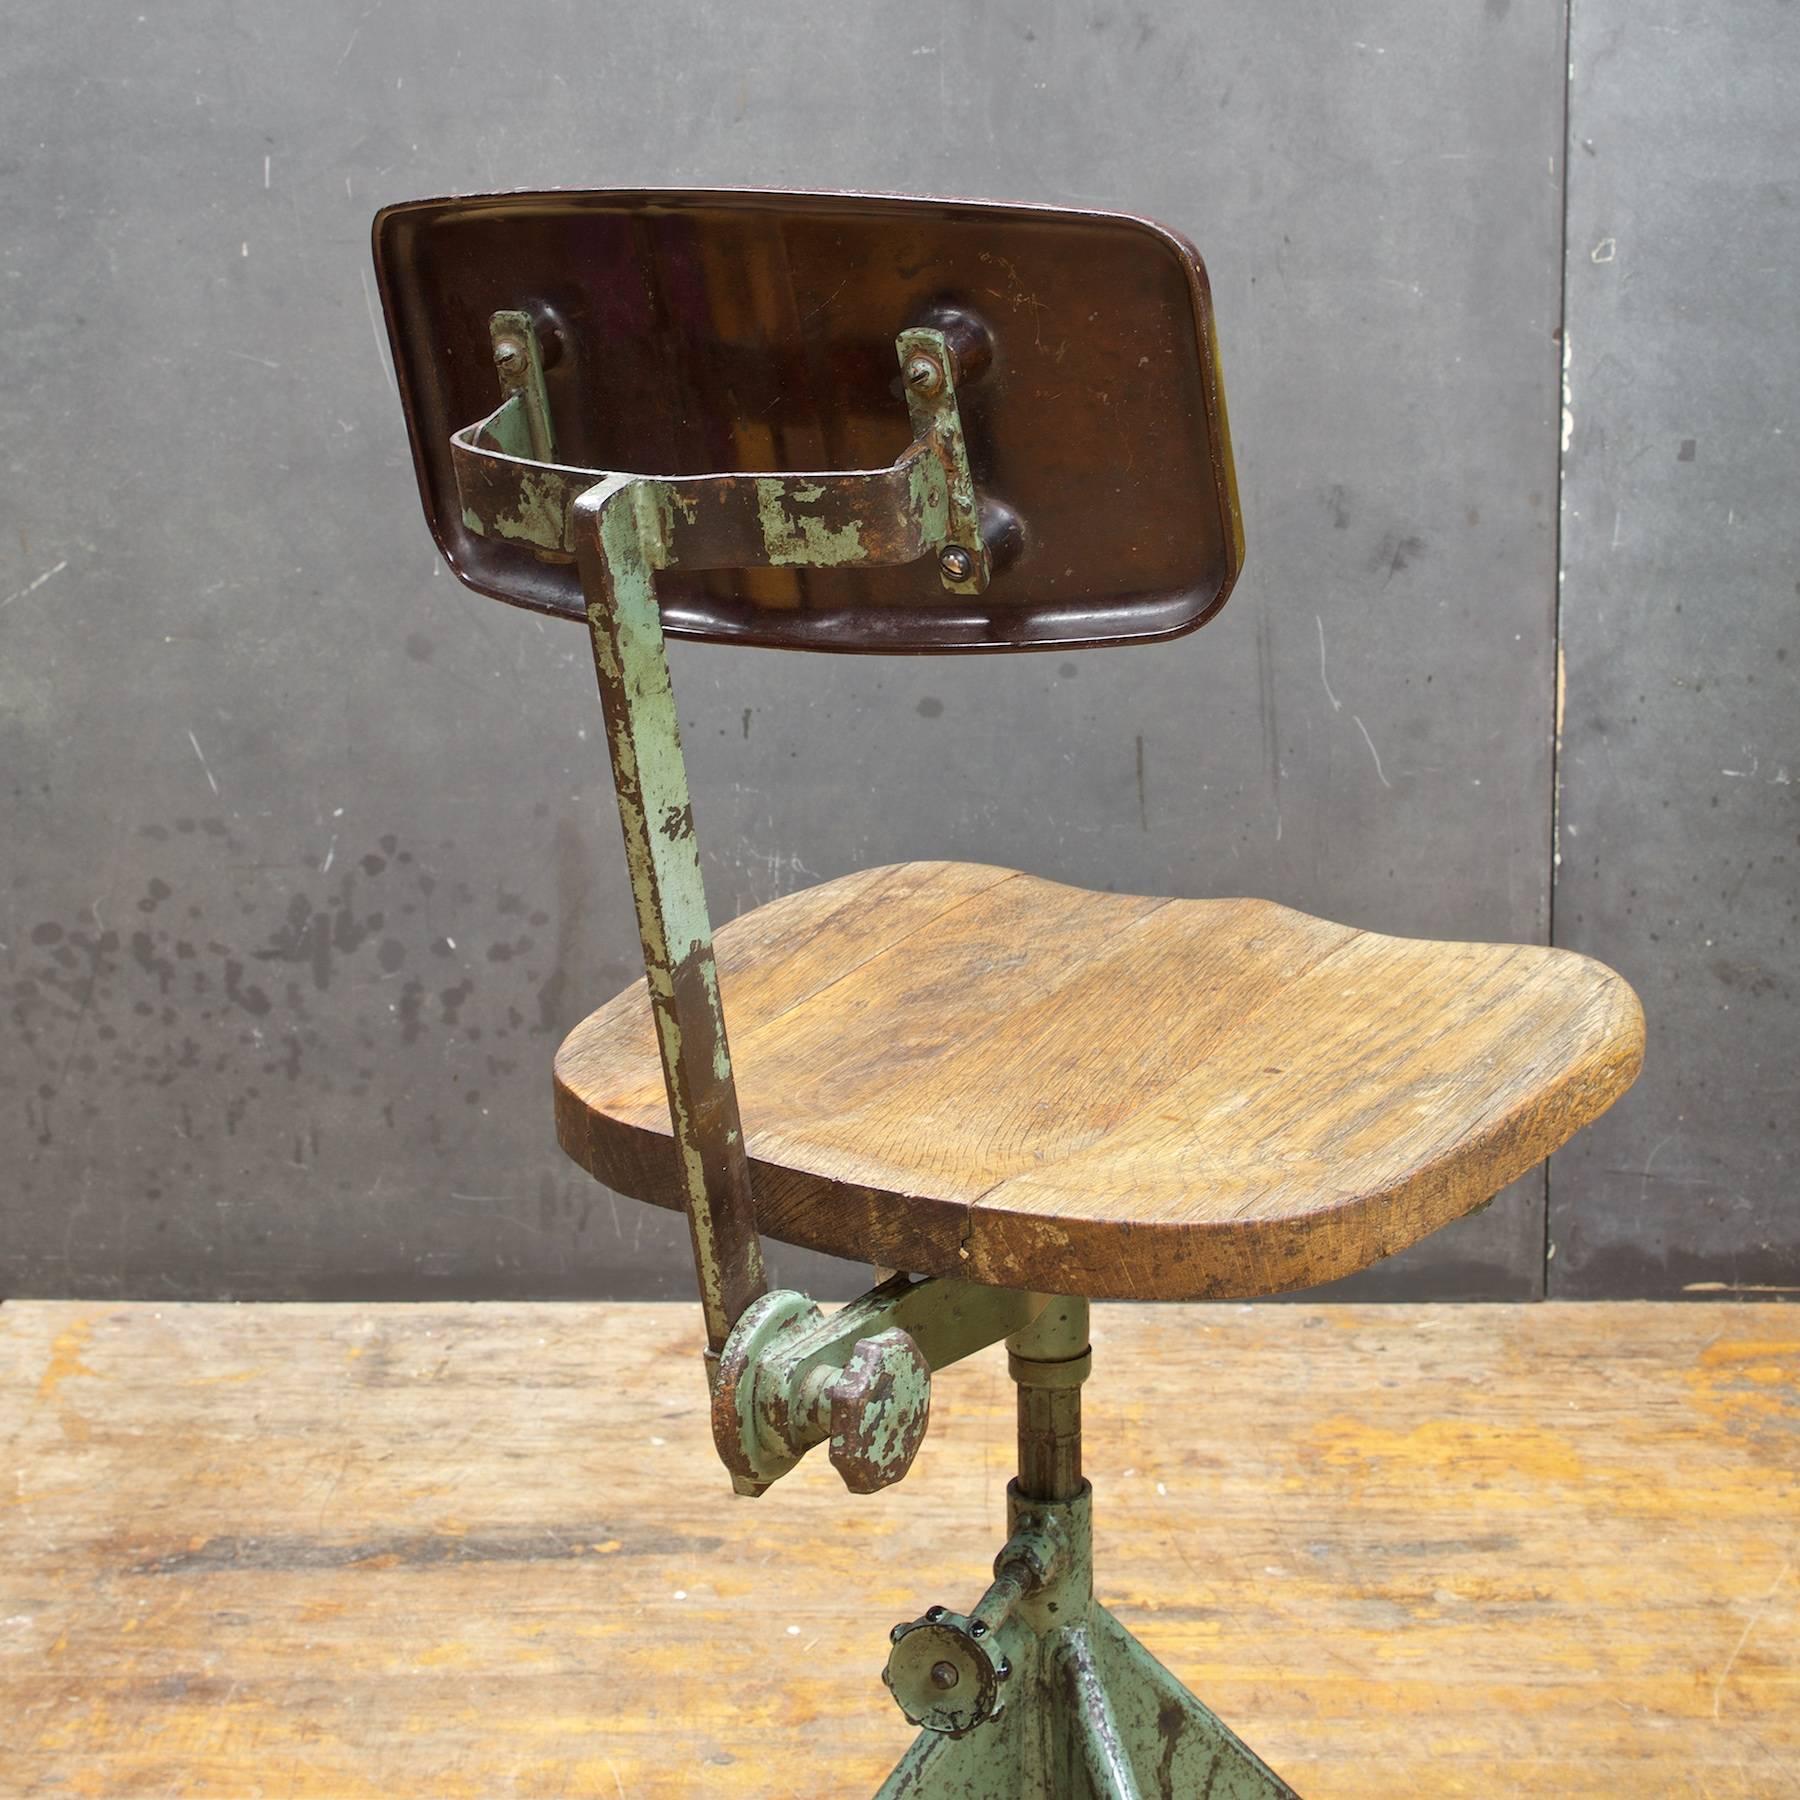 French 1950s Parisian Experfi Bervete Drafting Chair S.G.D.G. Attributed to Jean Prouve